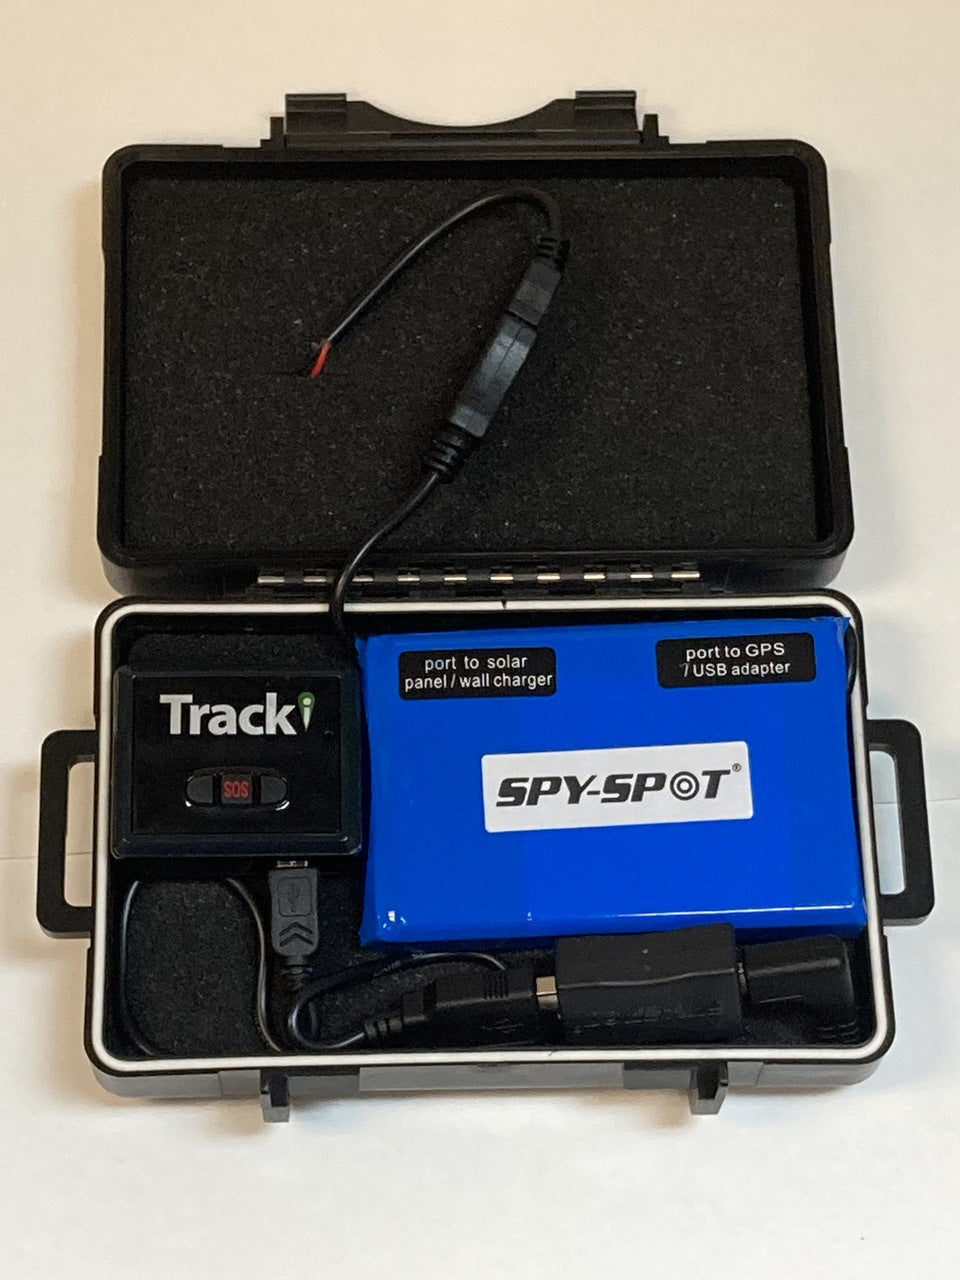 SpySpot Extended Battery for GPS Trackers with Solar Powered Magnetic Mount Case - USB Adapter Included - Works with Optimus, Prime, Spytec, Tracki, GPS Trackers GL300MG, GL300MA, GL200, GL300